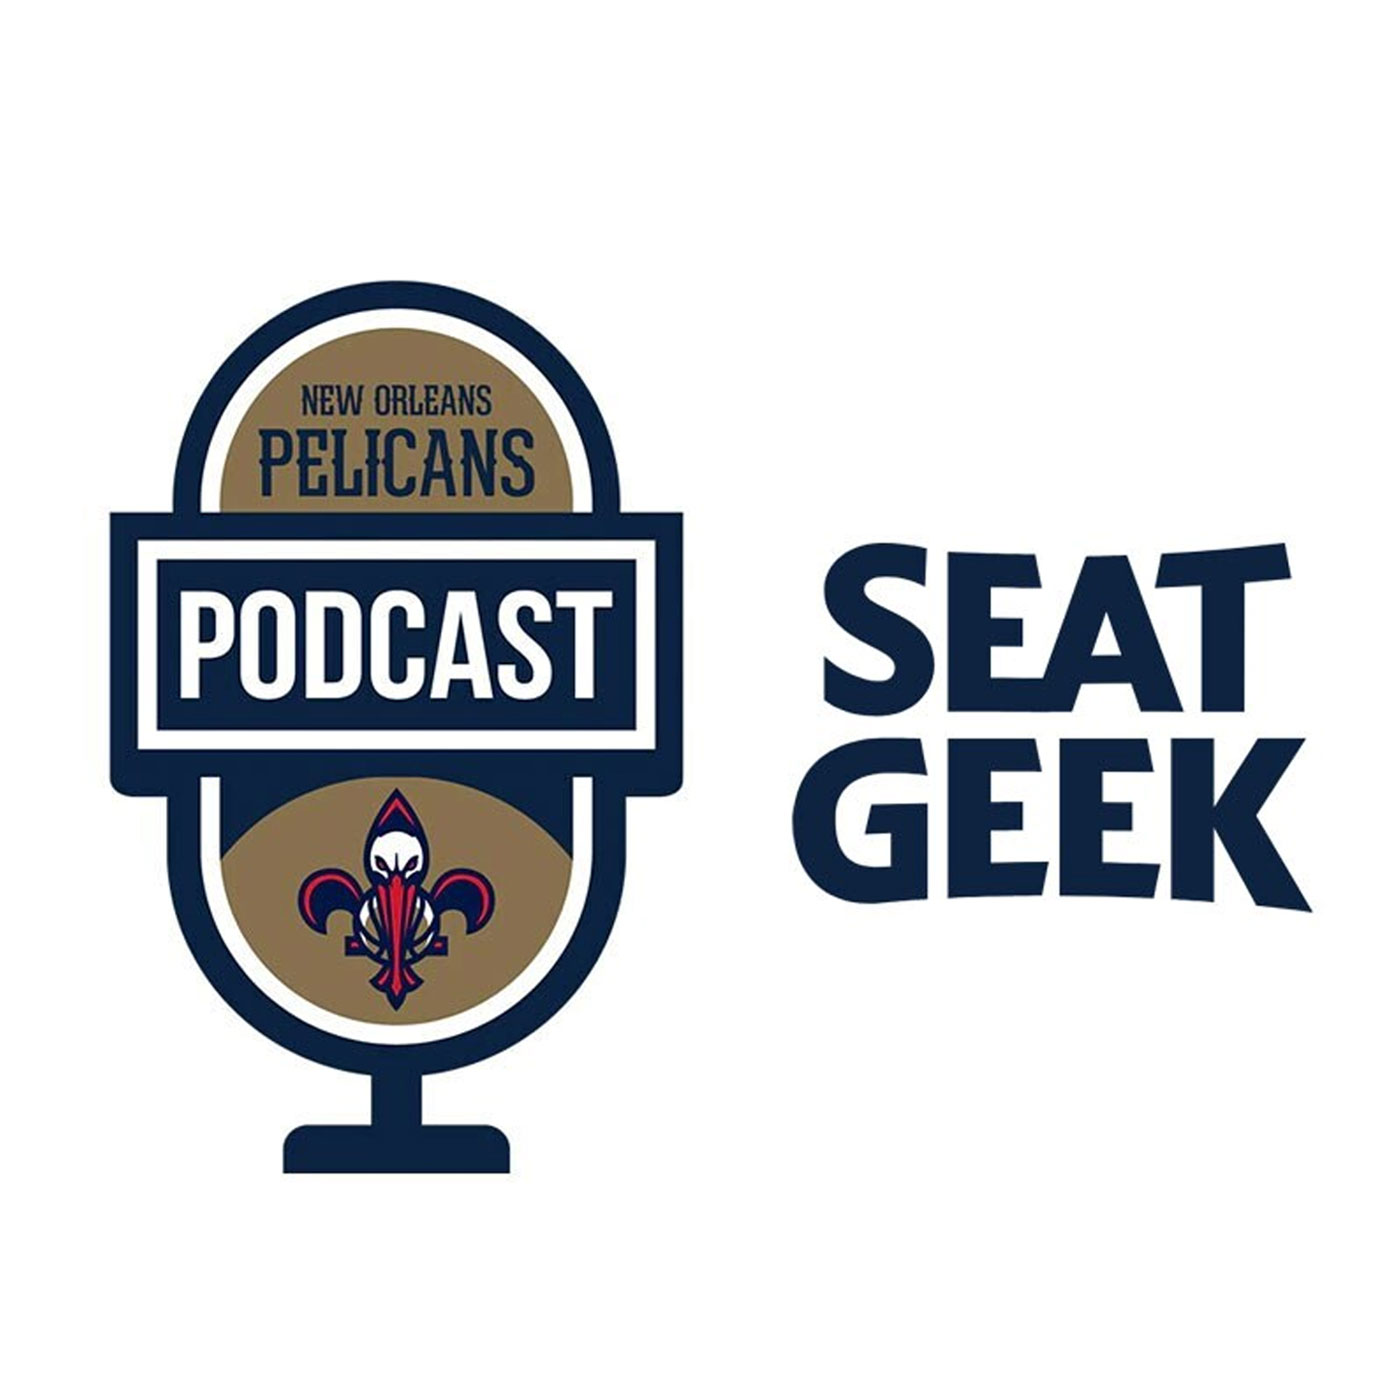 Dave Koehn on the New Orleans Pelicans Podcast presented by SeatGeek - December 31, 2021